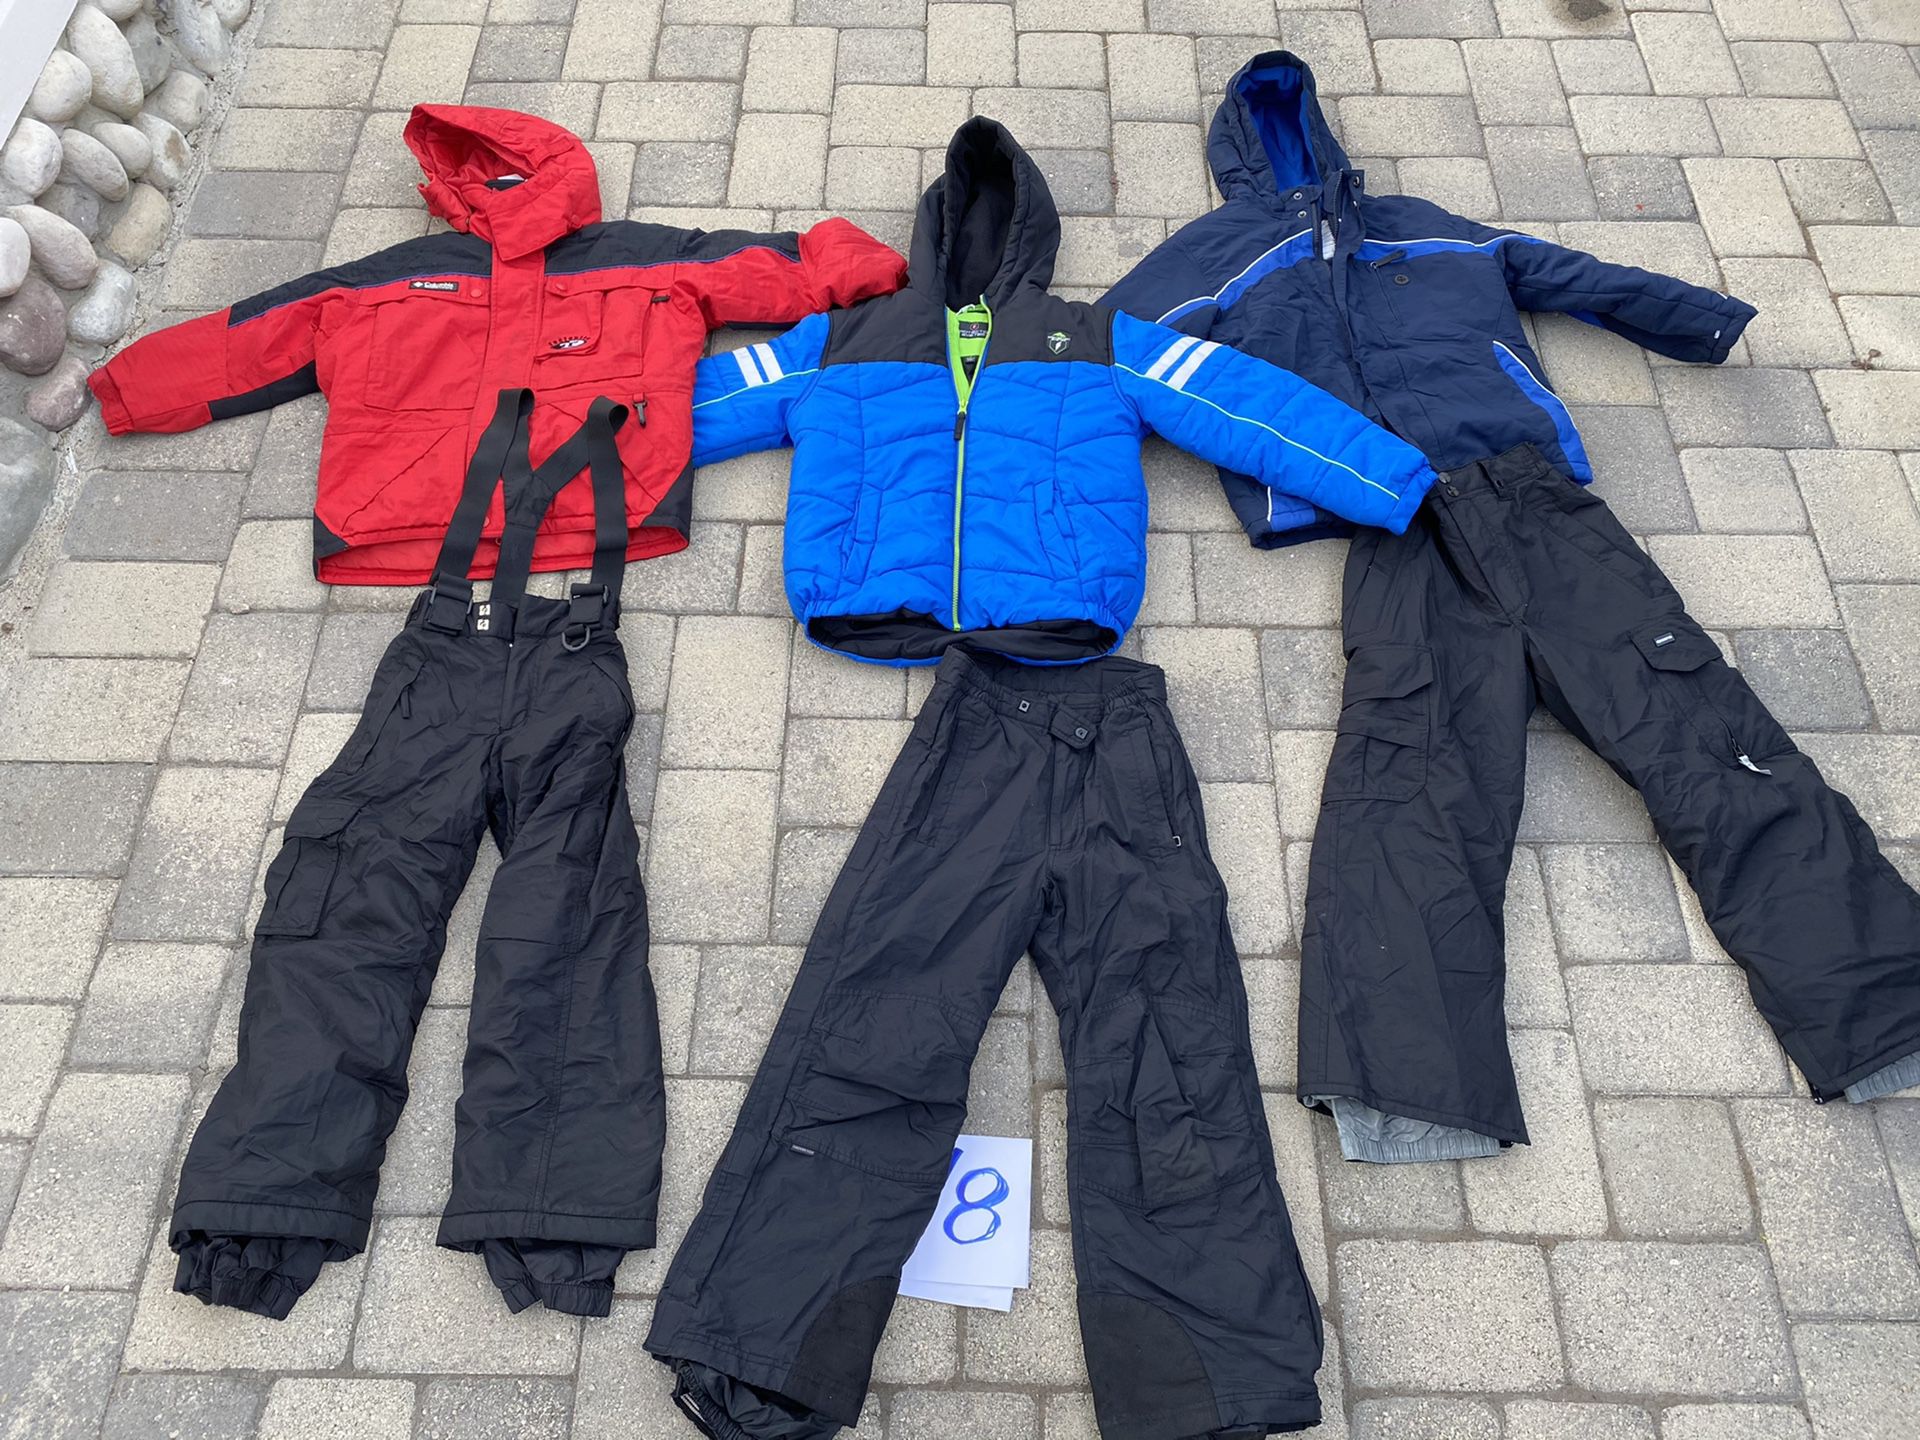 Kids size 6/7 , 7, 8, and 8/10 ski and snowboarding clothes. Jackets pants and bibs. Many brand names